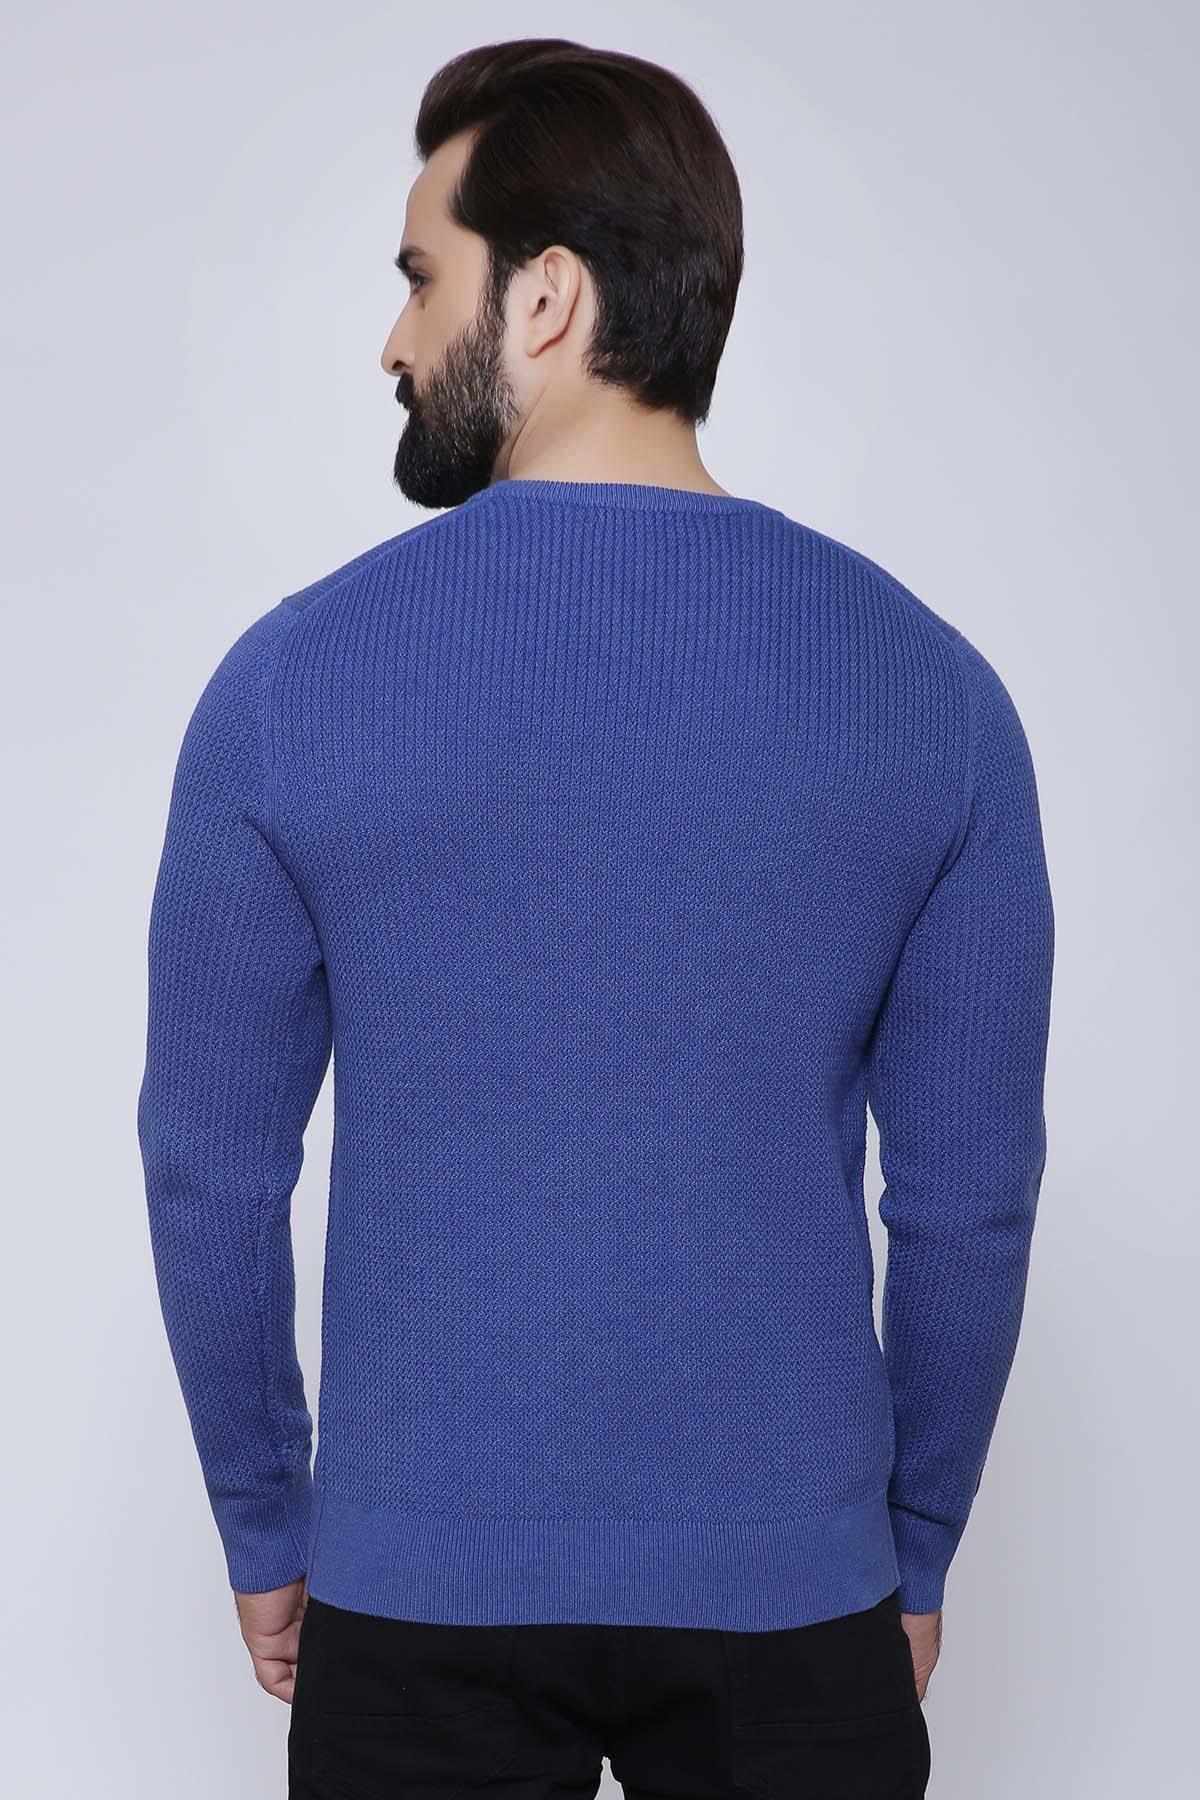 SWEATER ROUND NECK FULL SLEEVE BLUE at Charcoal Clothing